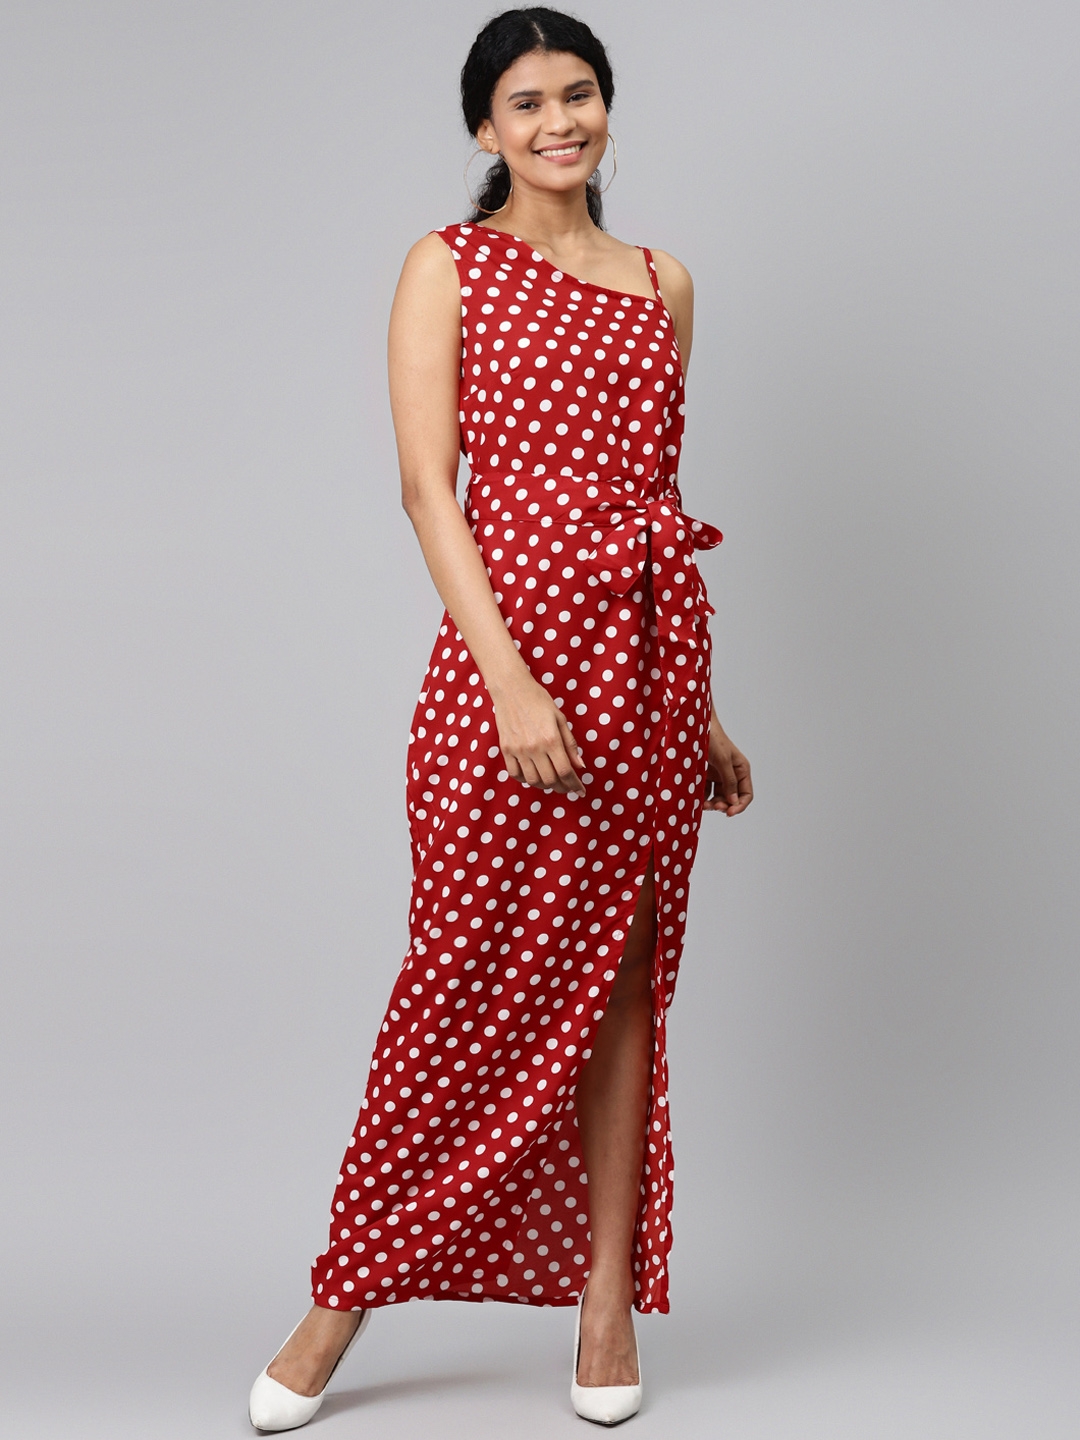 SIRIKIT Women Red   White Polka Dots Print One Shouldered Maxi Dress with Tie up